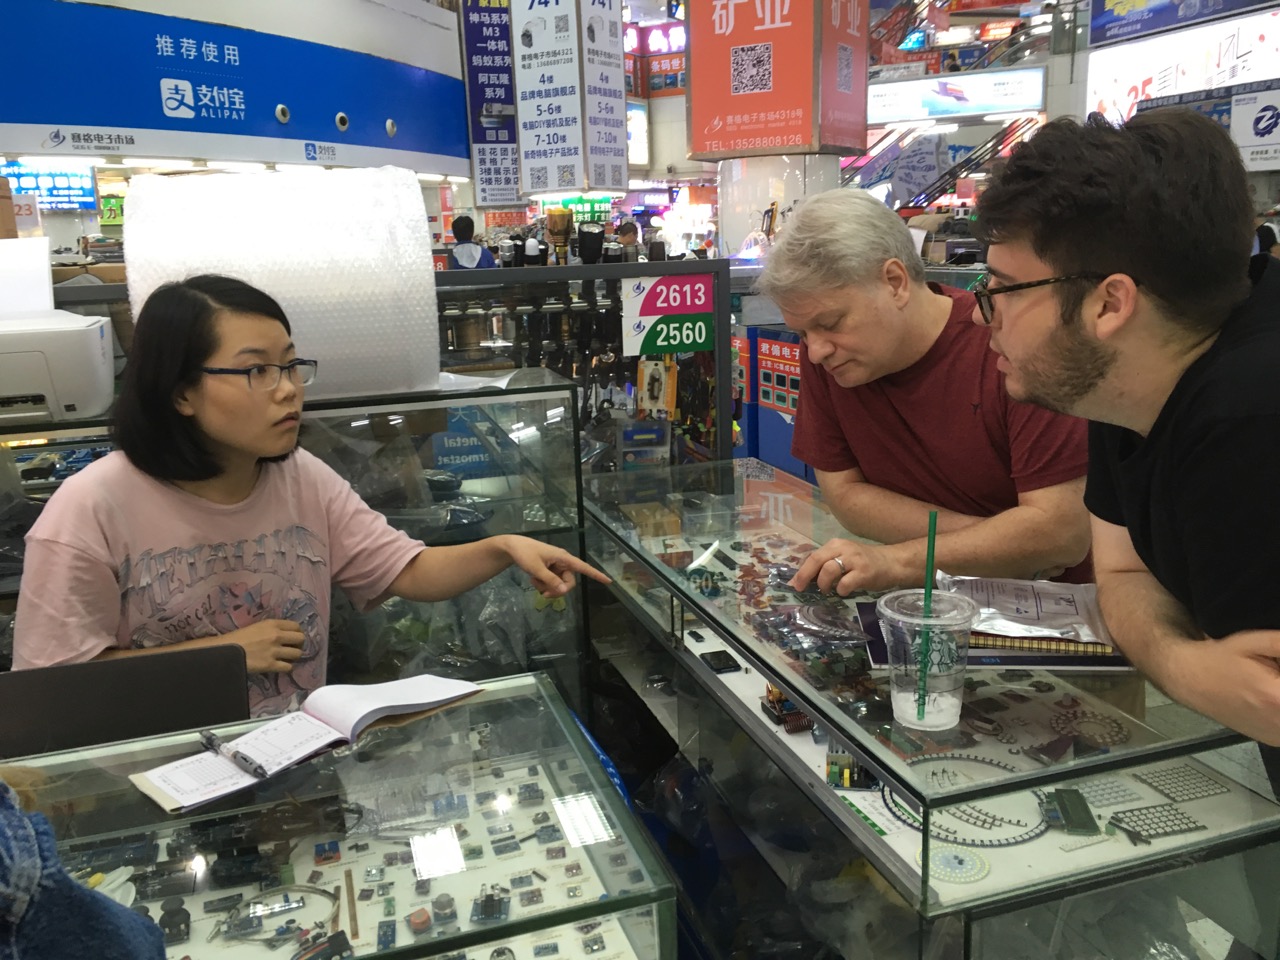 Tom Igoe shops for electronic components in Shenzhen, China